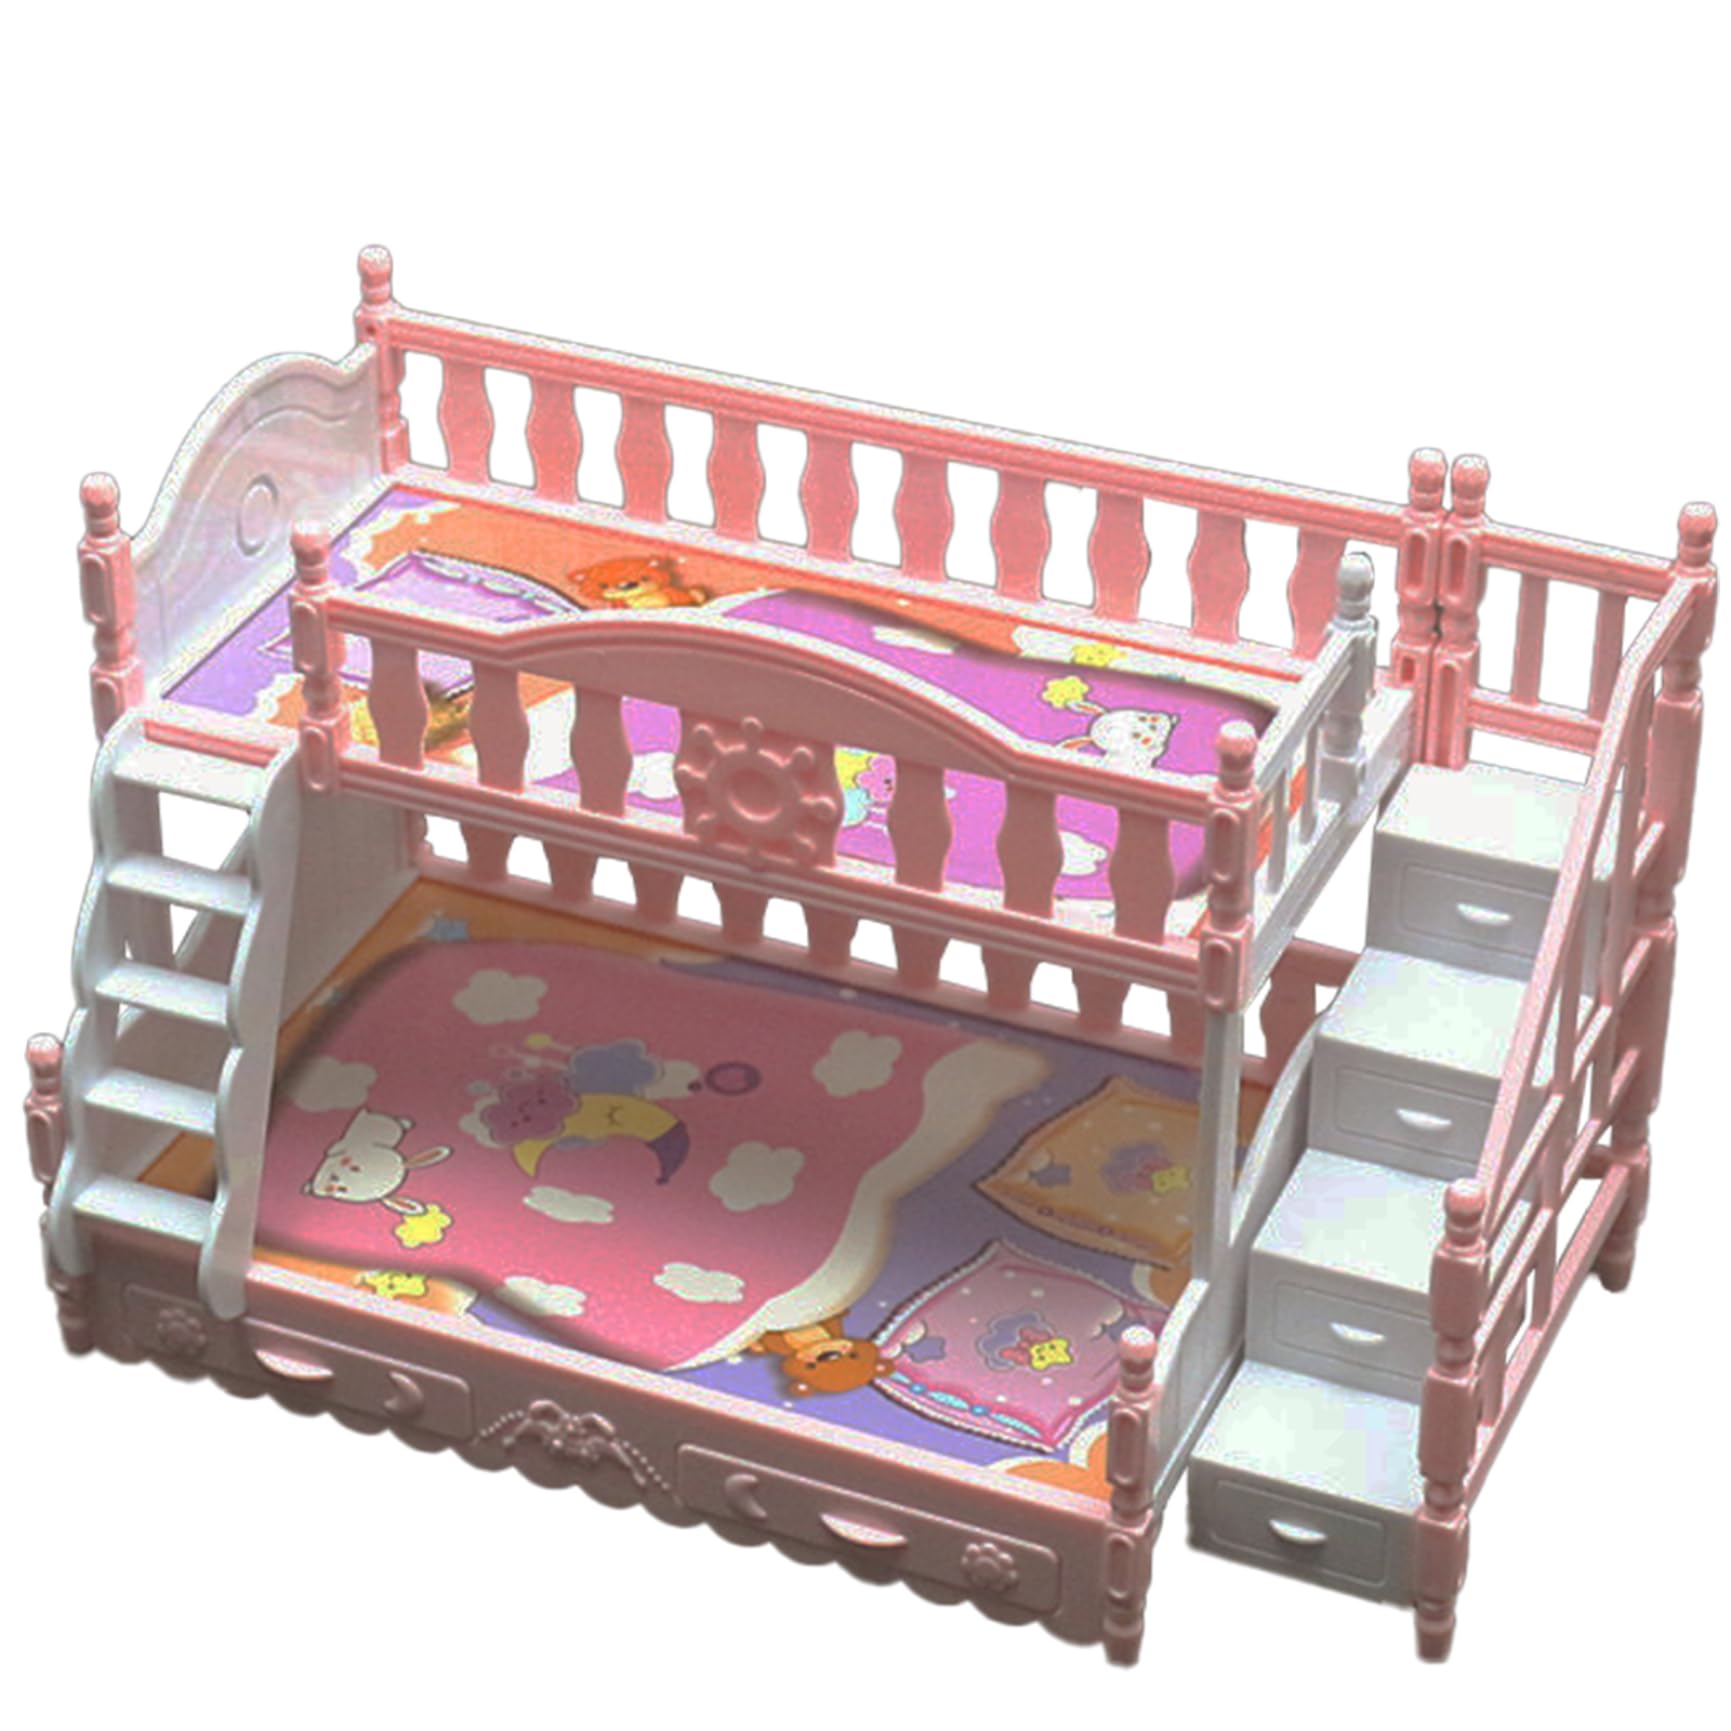 Baby Doll Bunk Bed for Girls Baby Doll Cot Miniature Simulation Cute Cartoon Dollhouse Bed with Stairs Plastic Dollhouse Furniture Birthday Gift